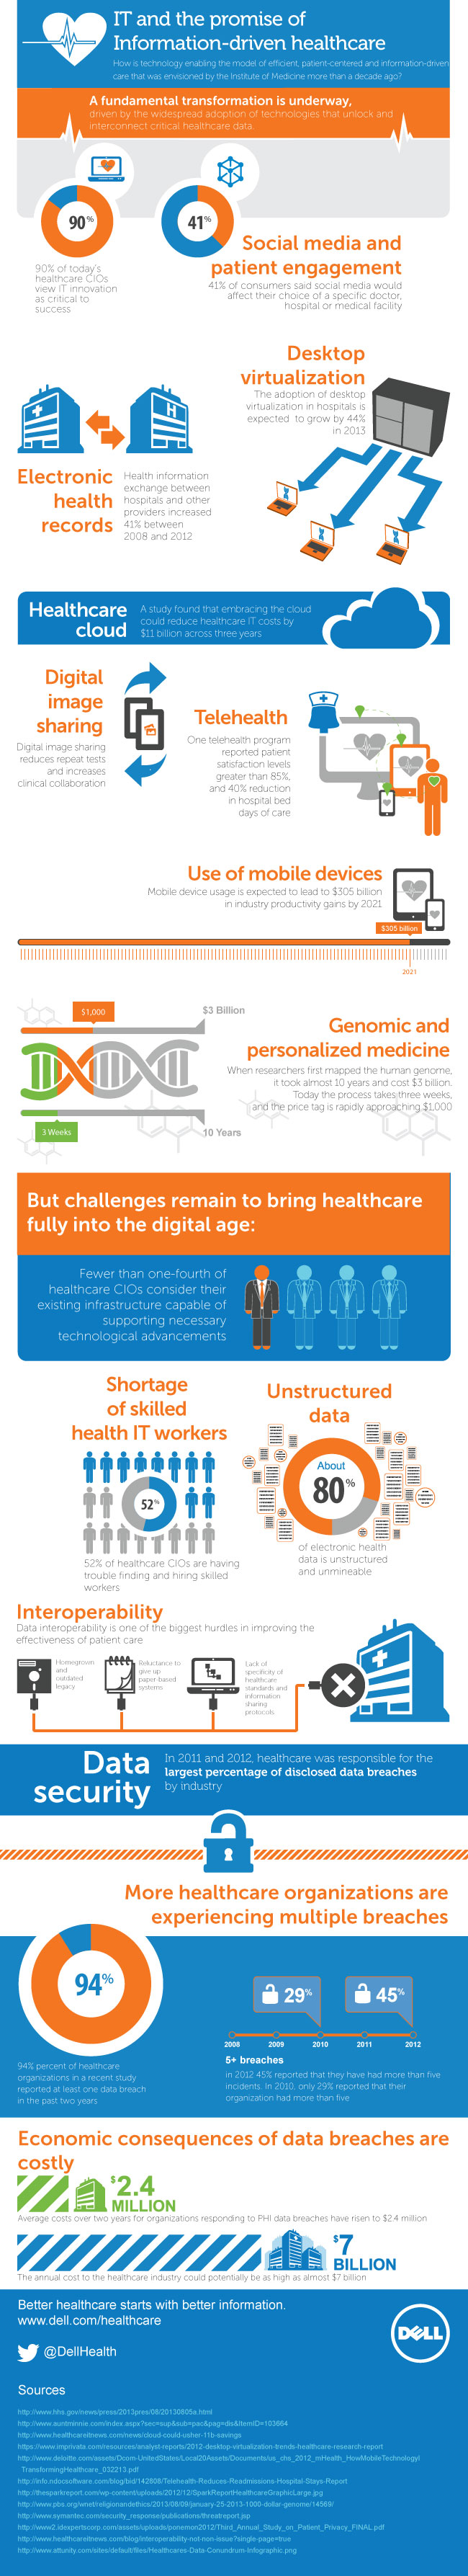 Infographic: On the road to information-driven healthcare | Dell Hong Kong